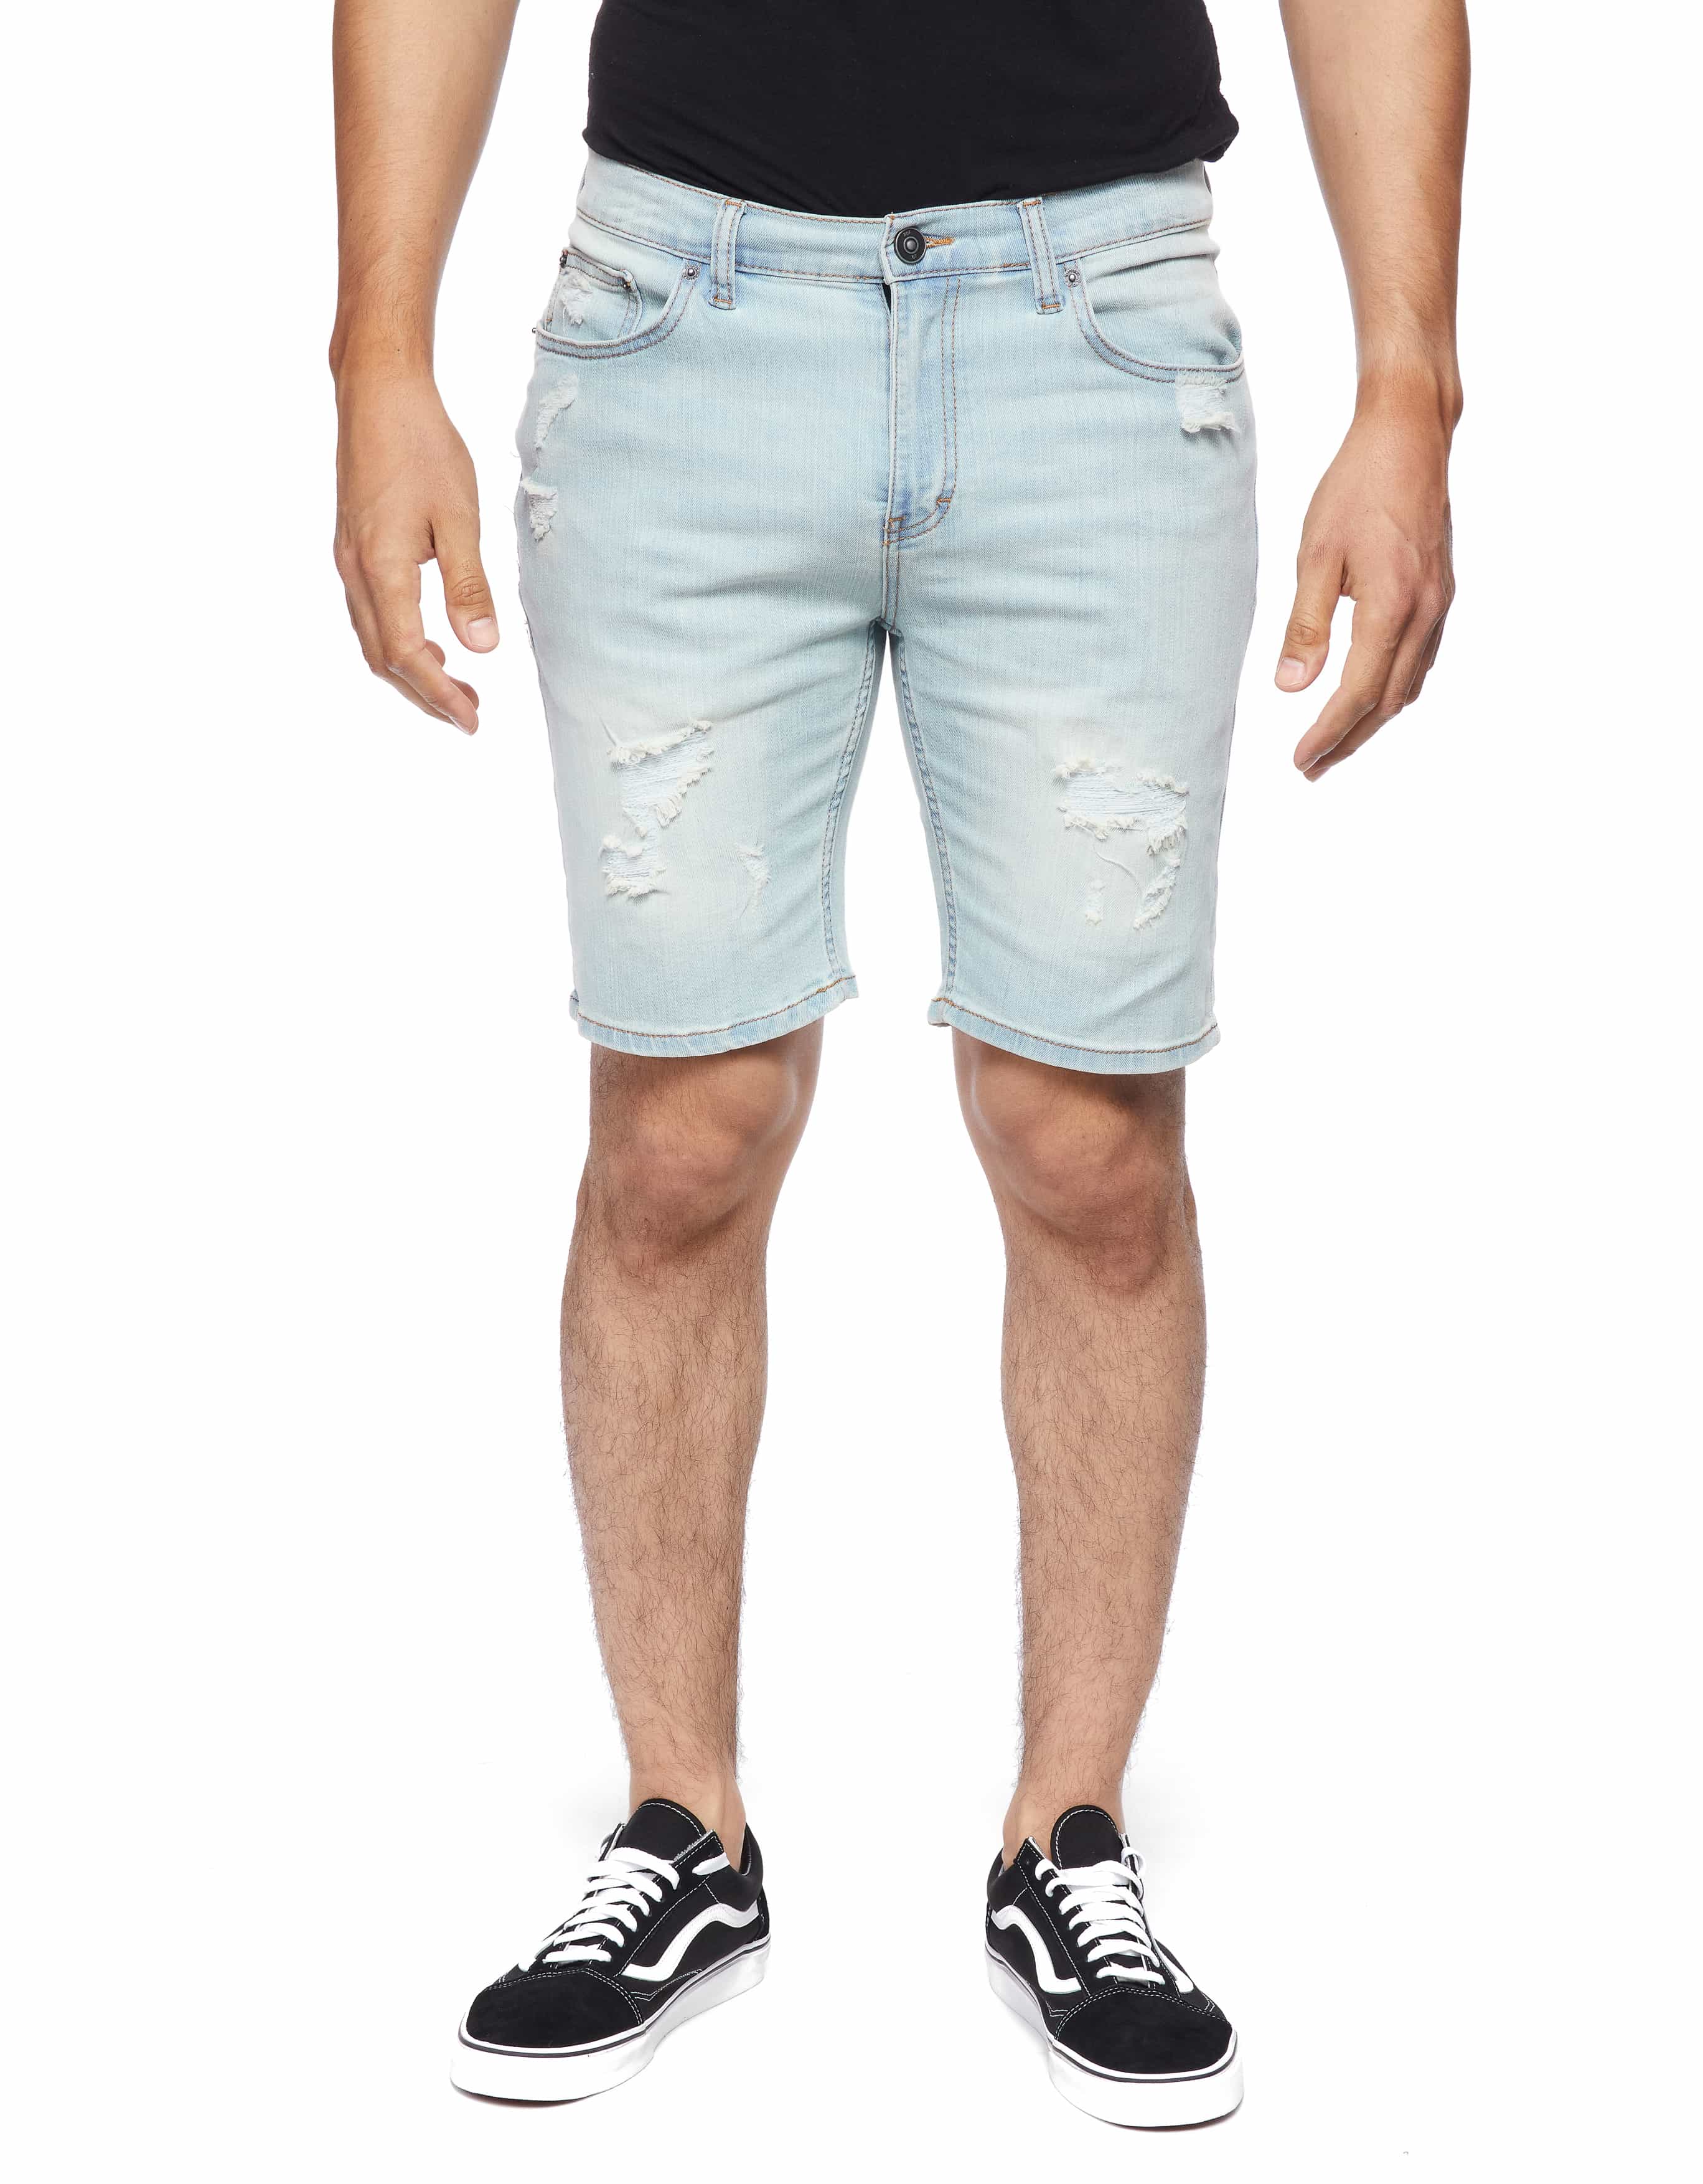 Second Front view of model wearing Ring of Fire’s Men’s Ripper Denim Shorts in Blue Bleached